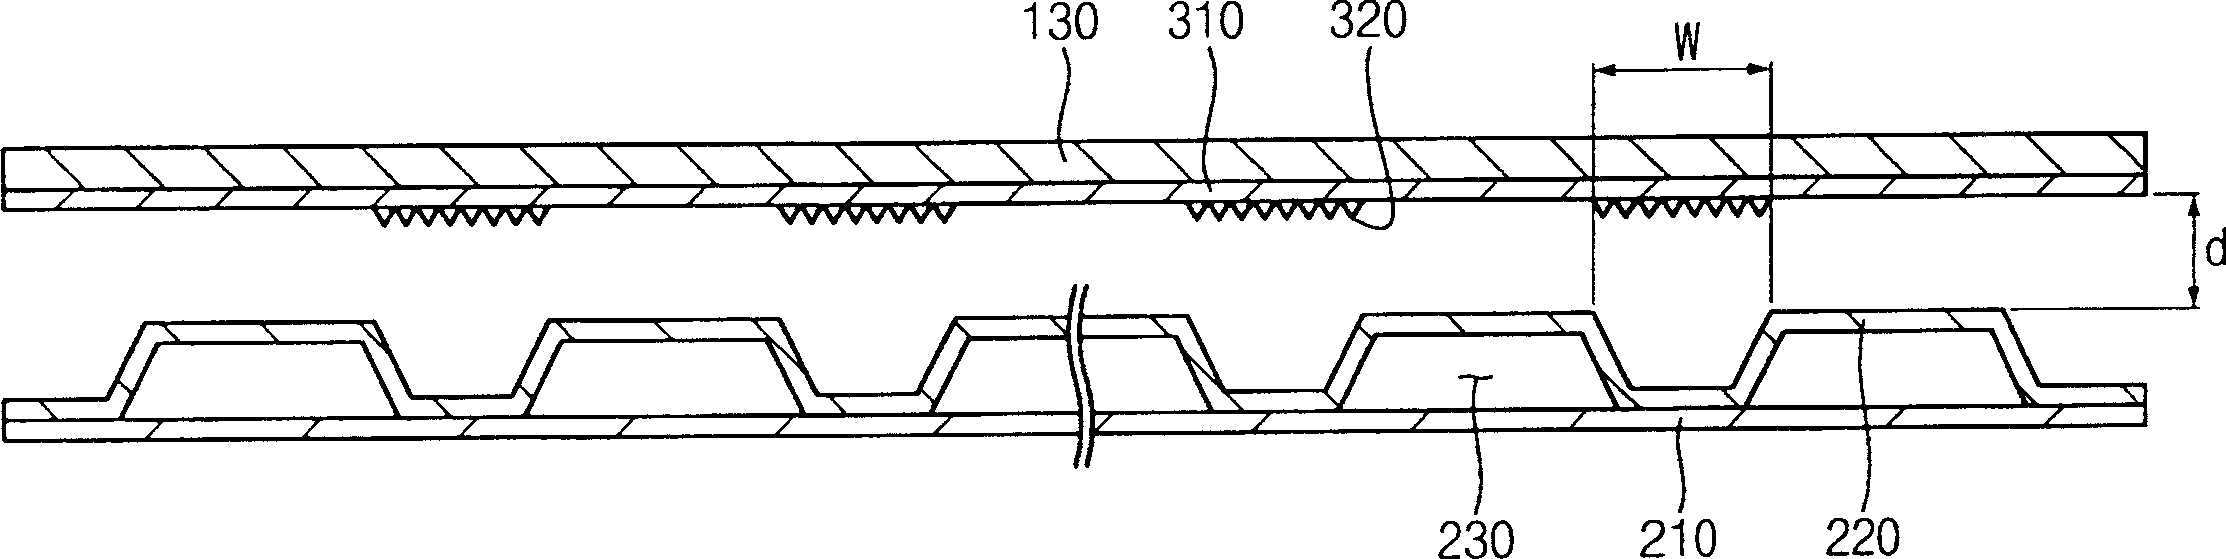 Backlight assembly, method of manufacturing the same and liquid crystal display apparatus having the same